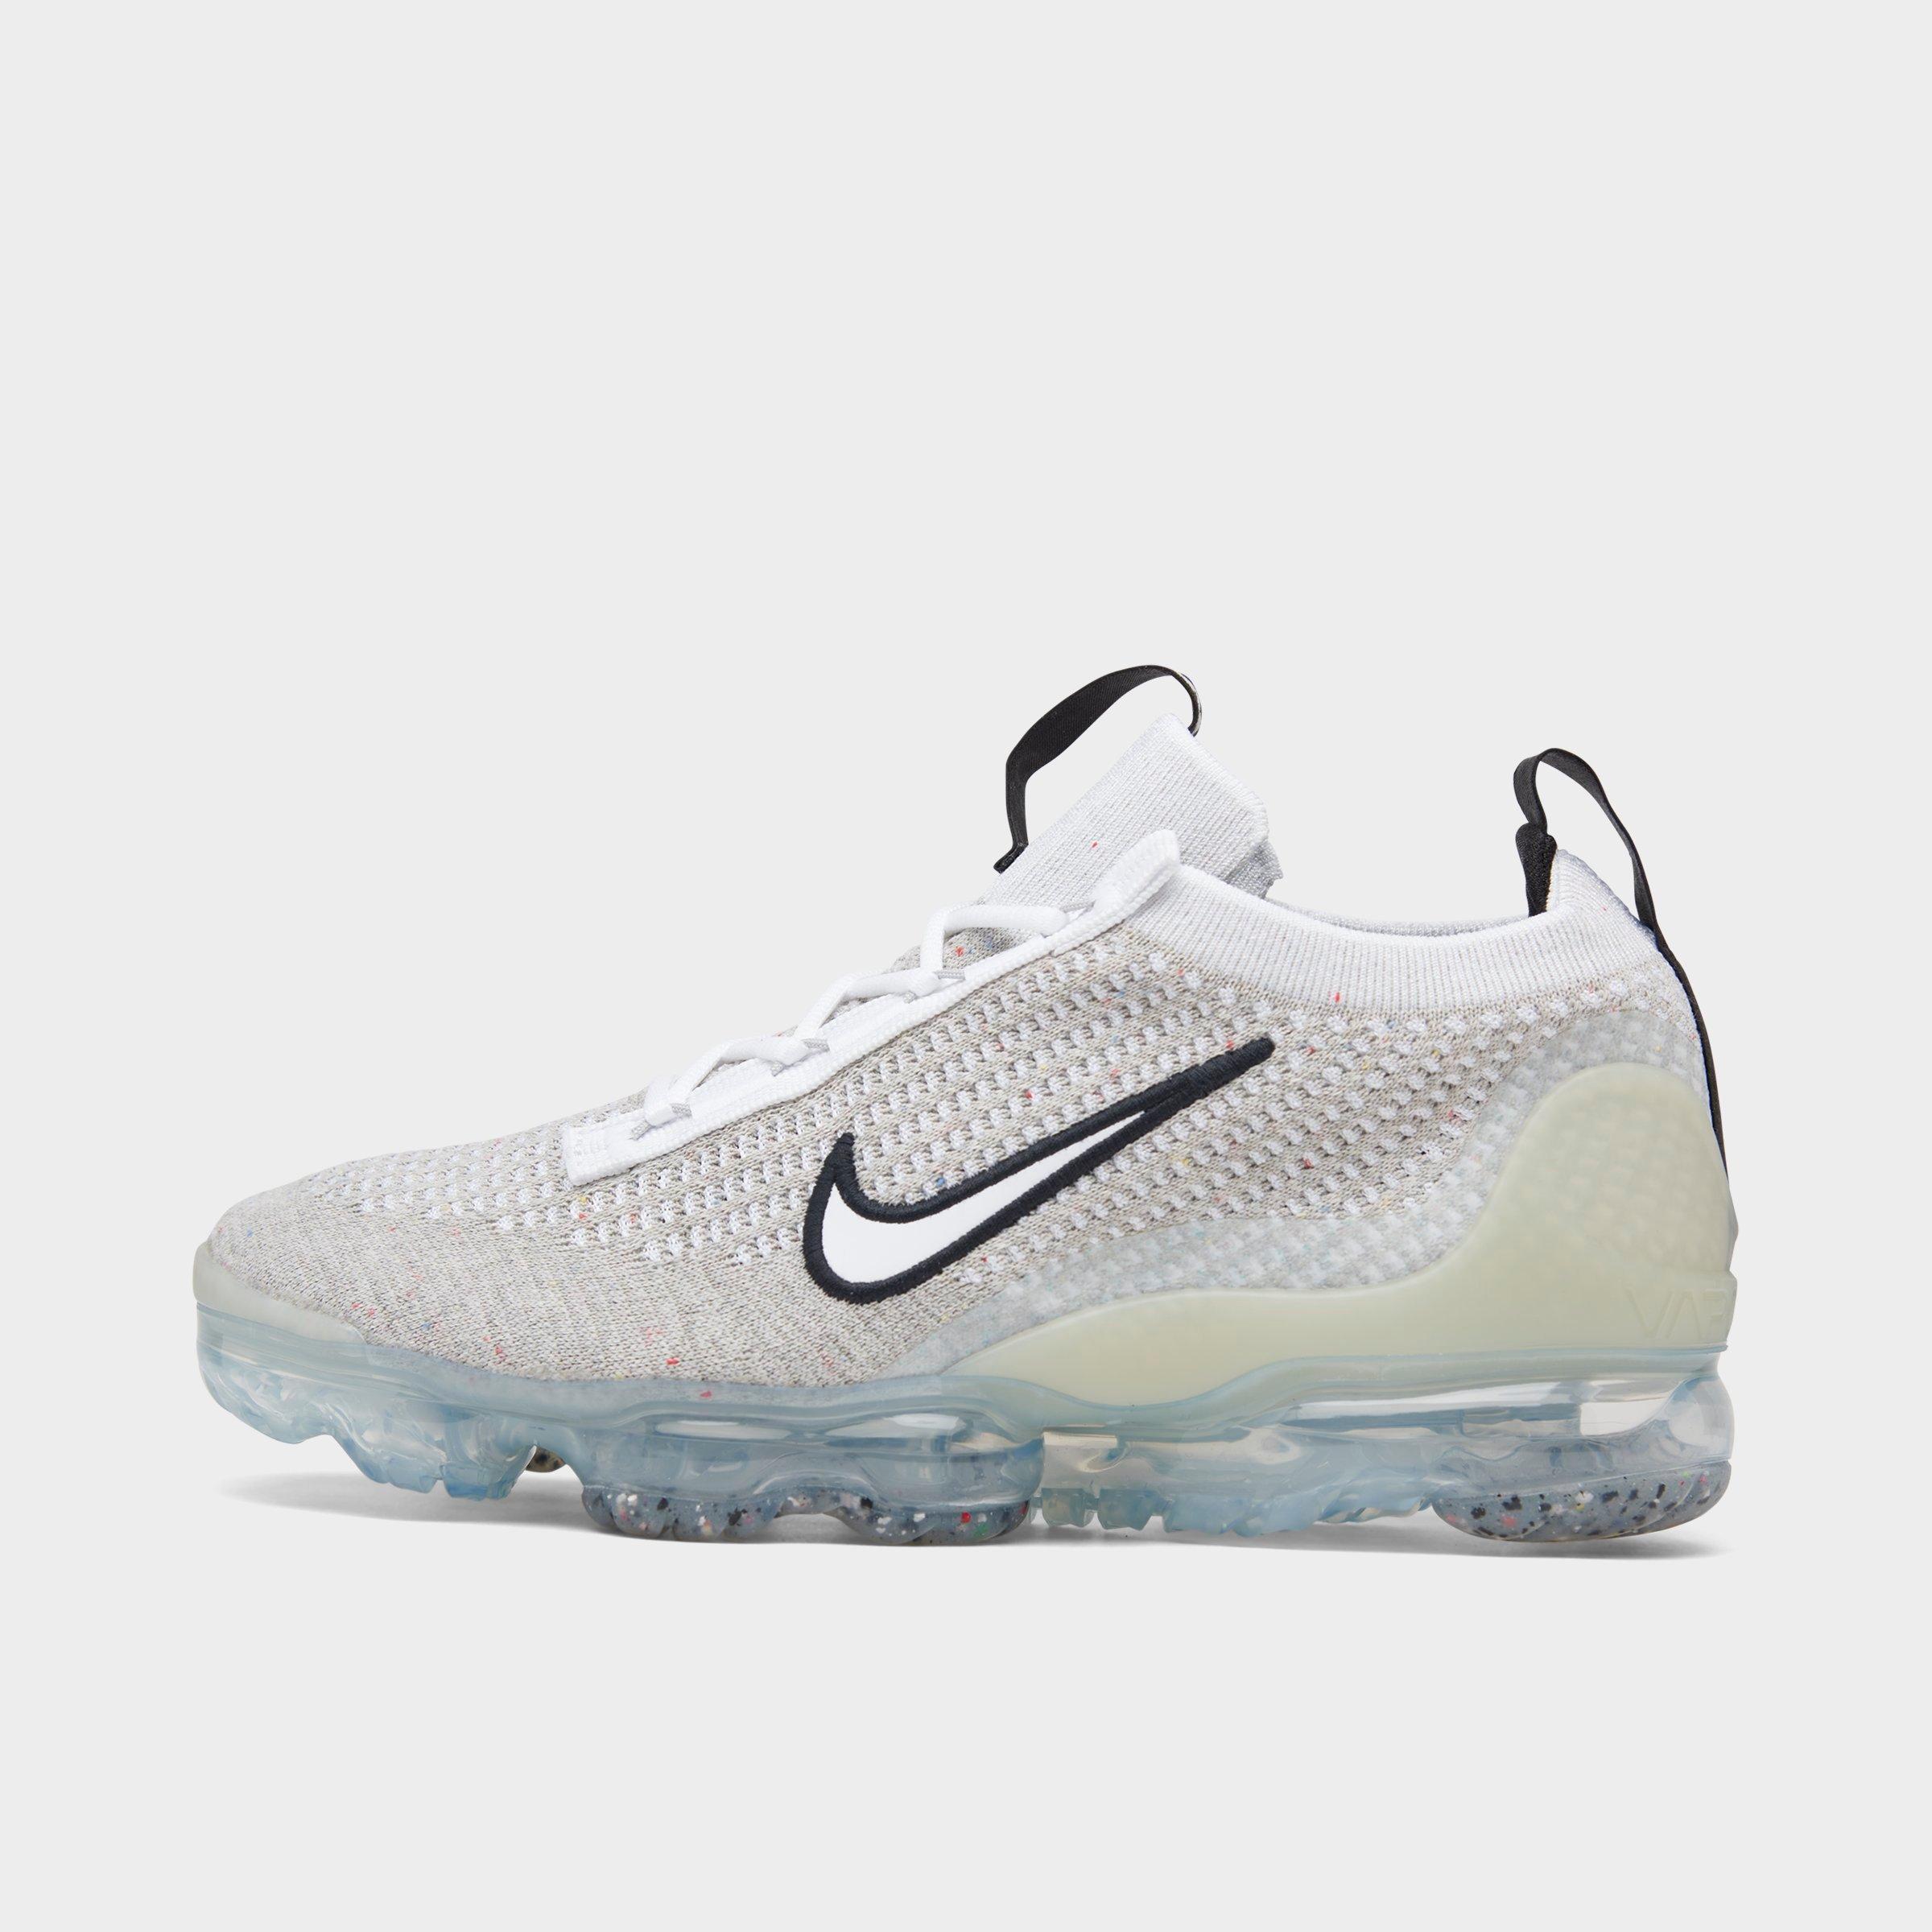 vapormax youth size